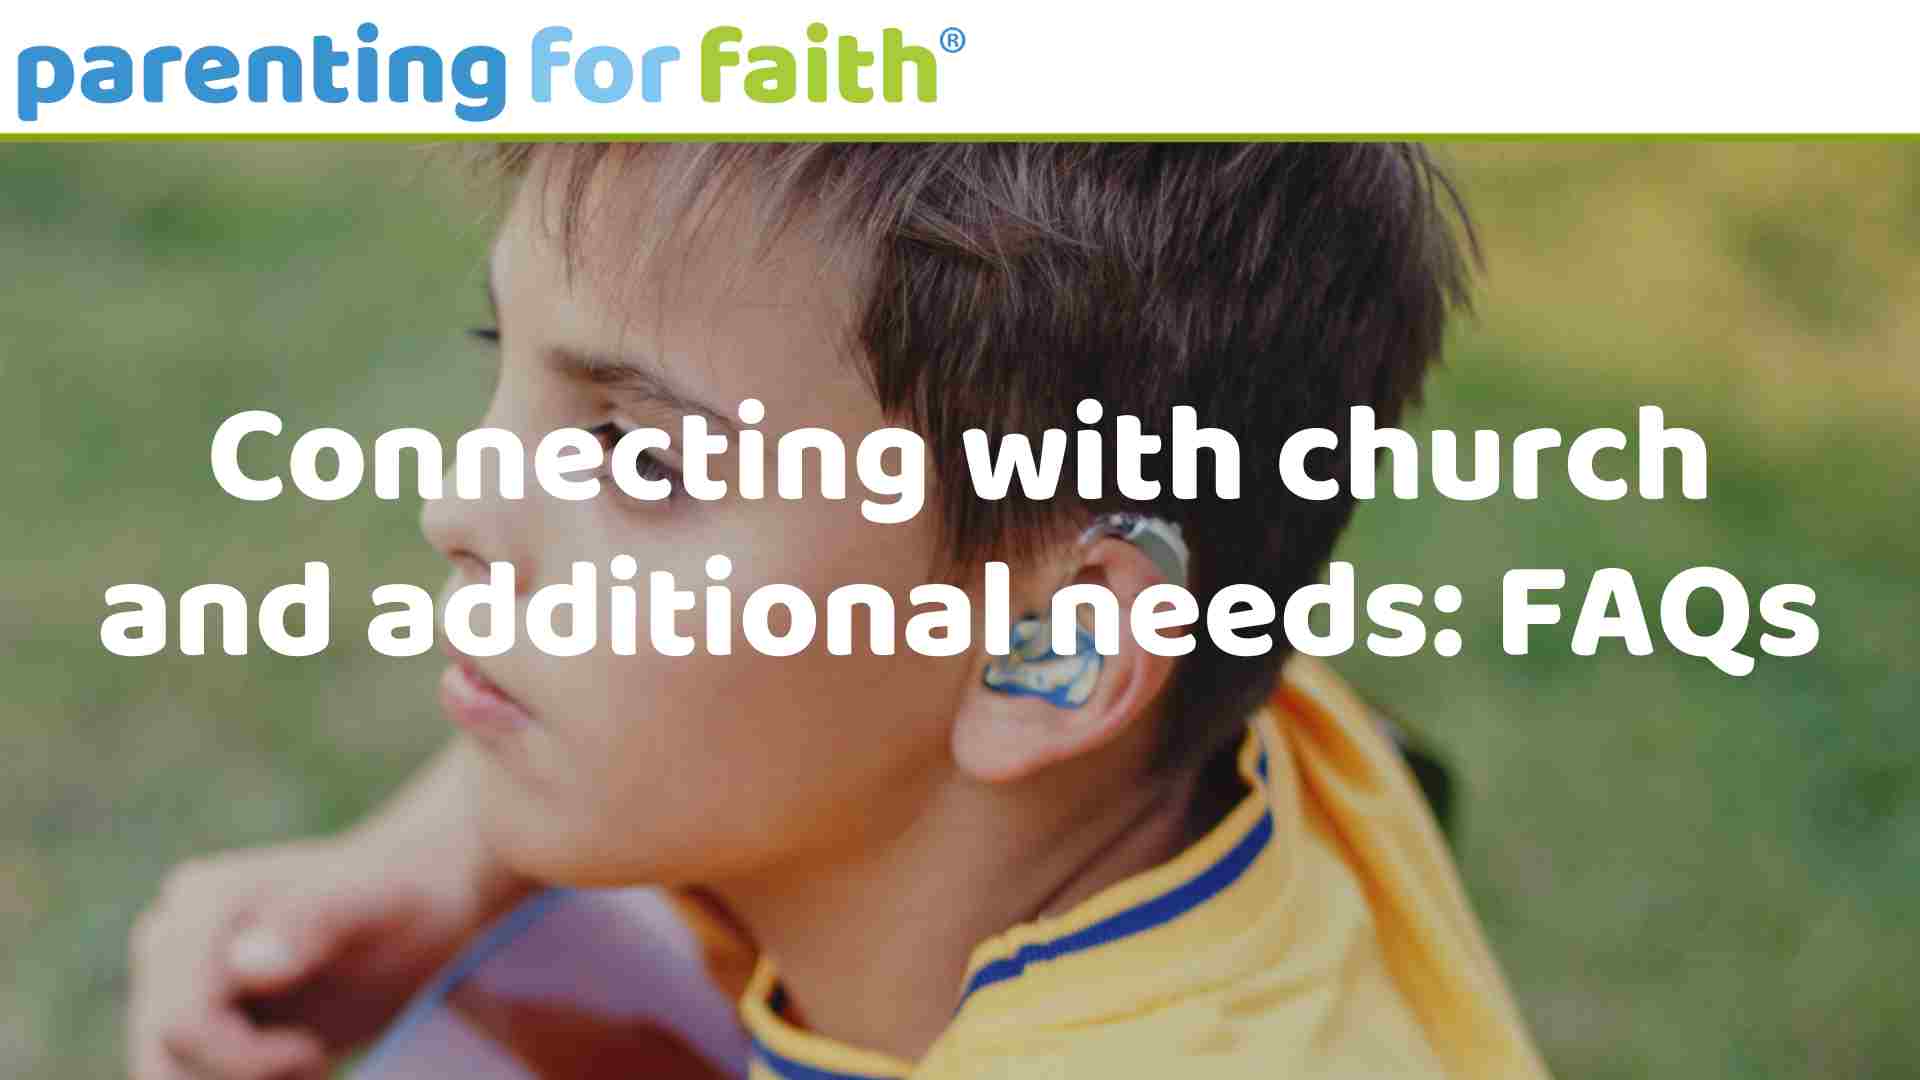 connecting with church and additional needs FAQ image credit hard of hearing preteen boy playing guitar outdoors from annakraynova via Canva Pro